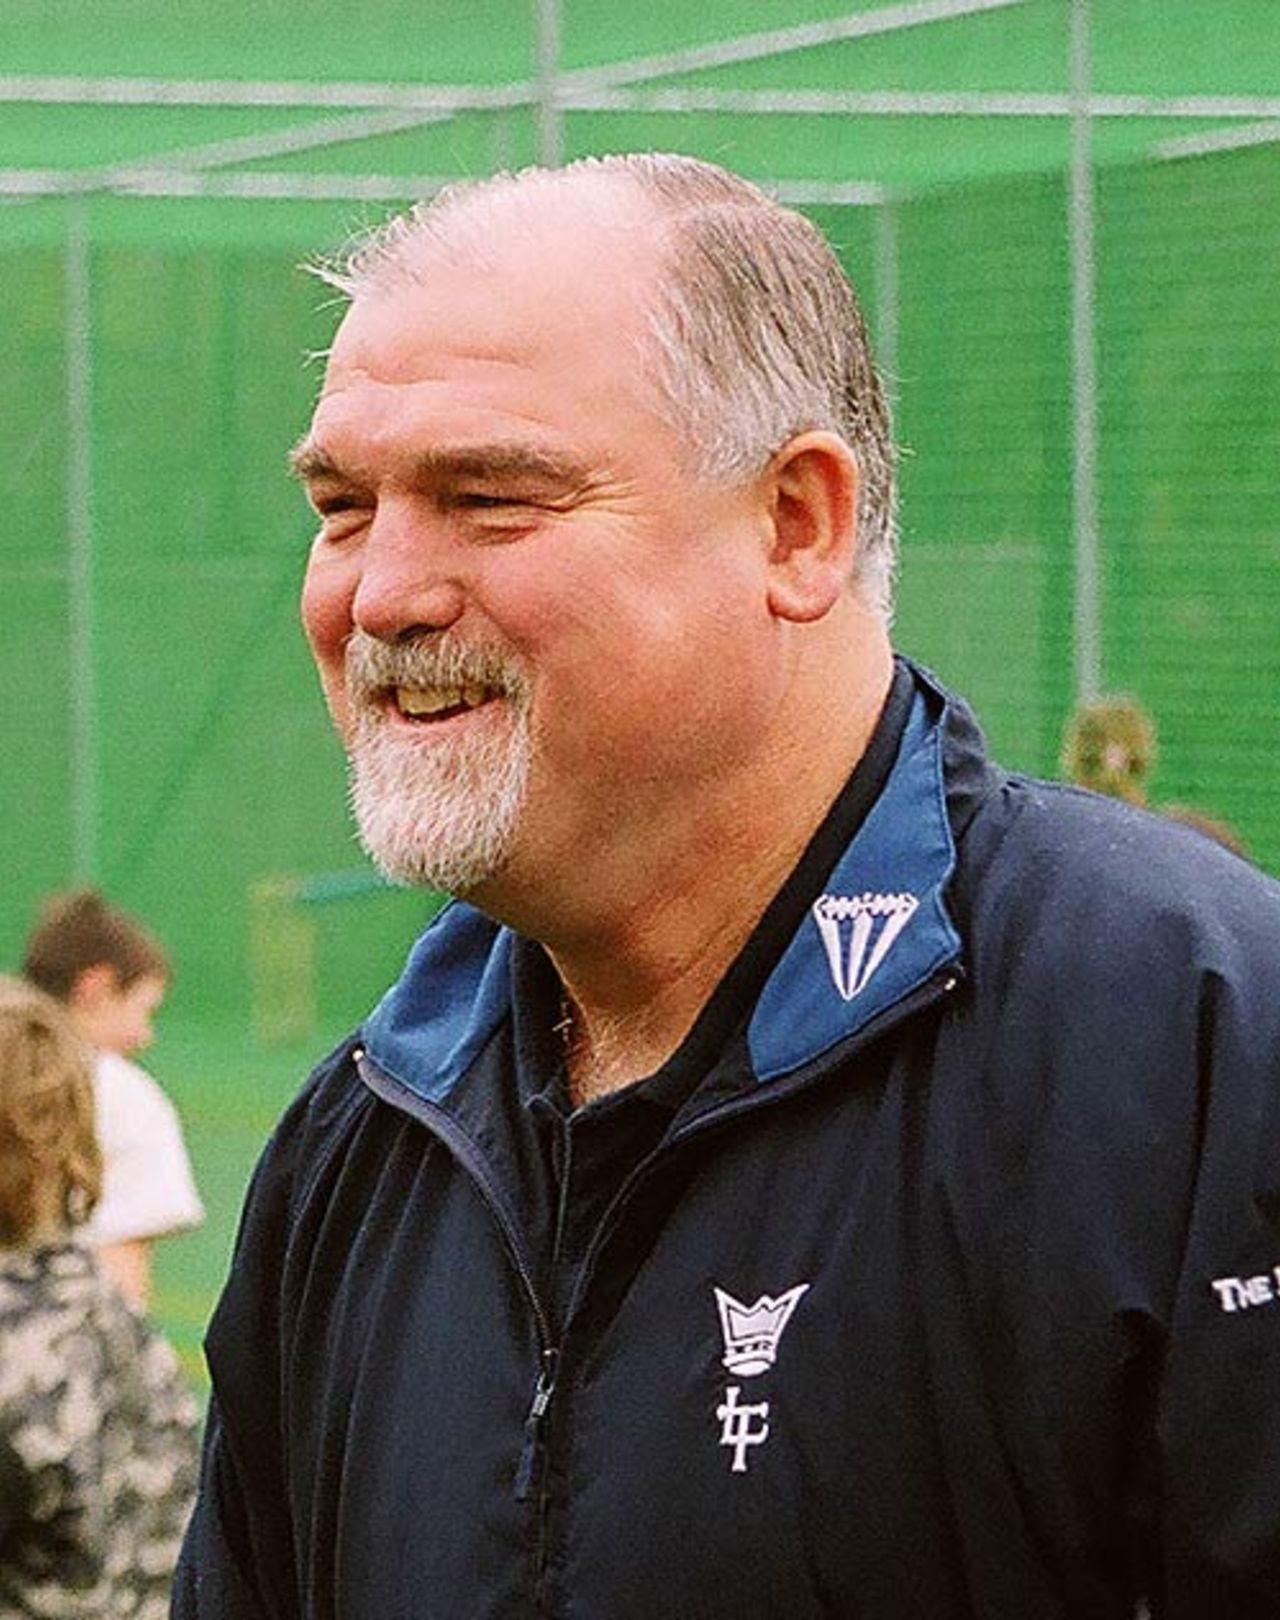 Mike Gatting, president of the Lord's Taverners, opens a new cricket centre in Paddington, February 22, 2007